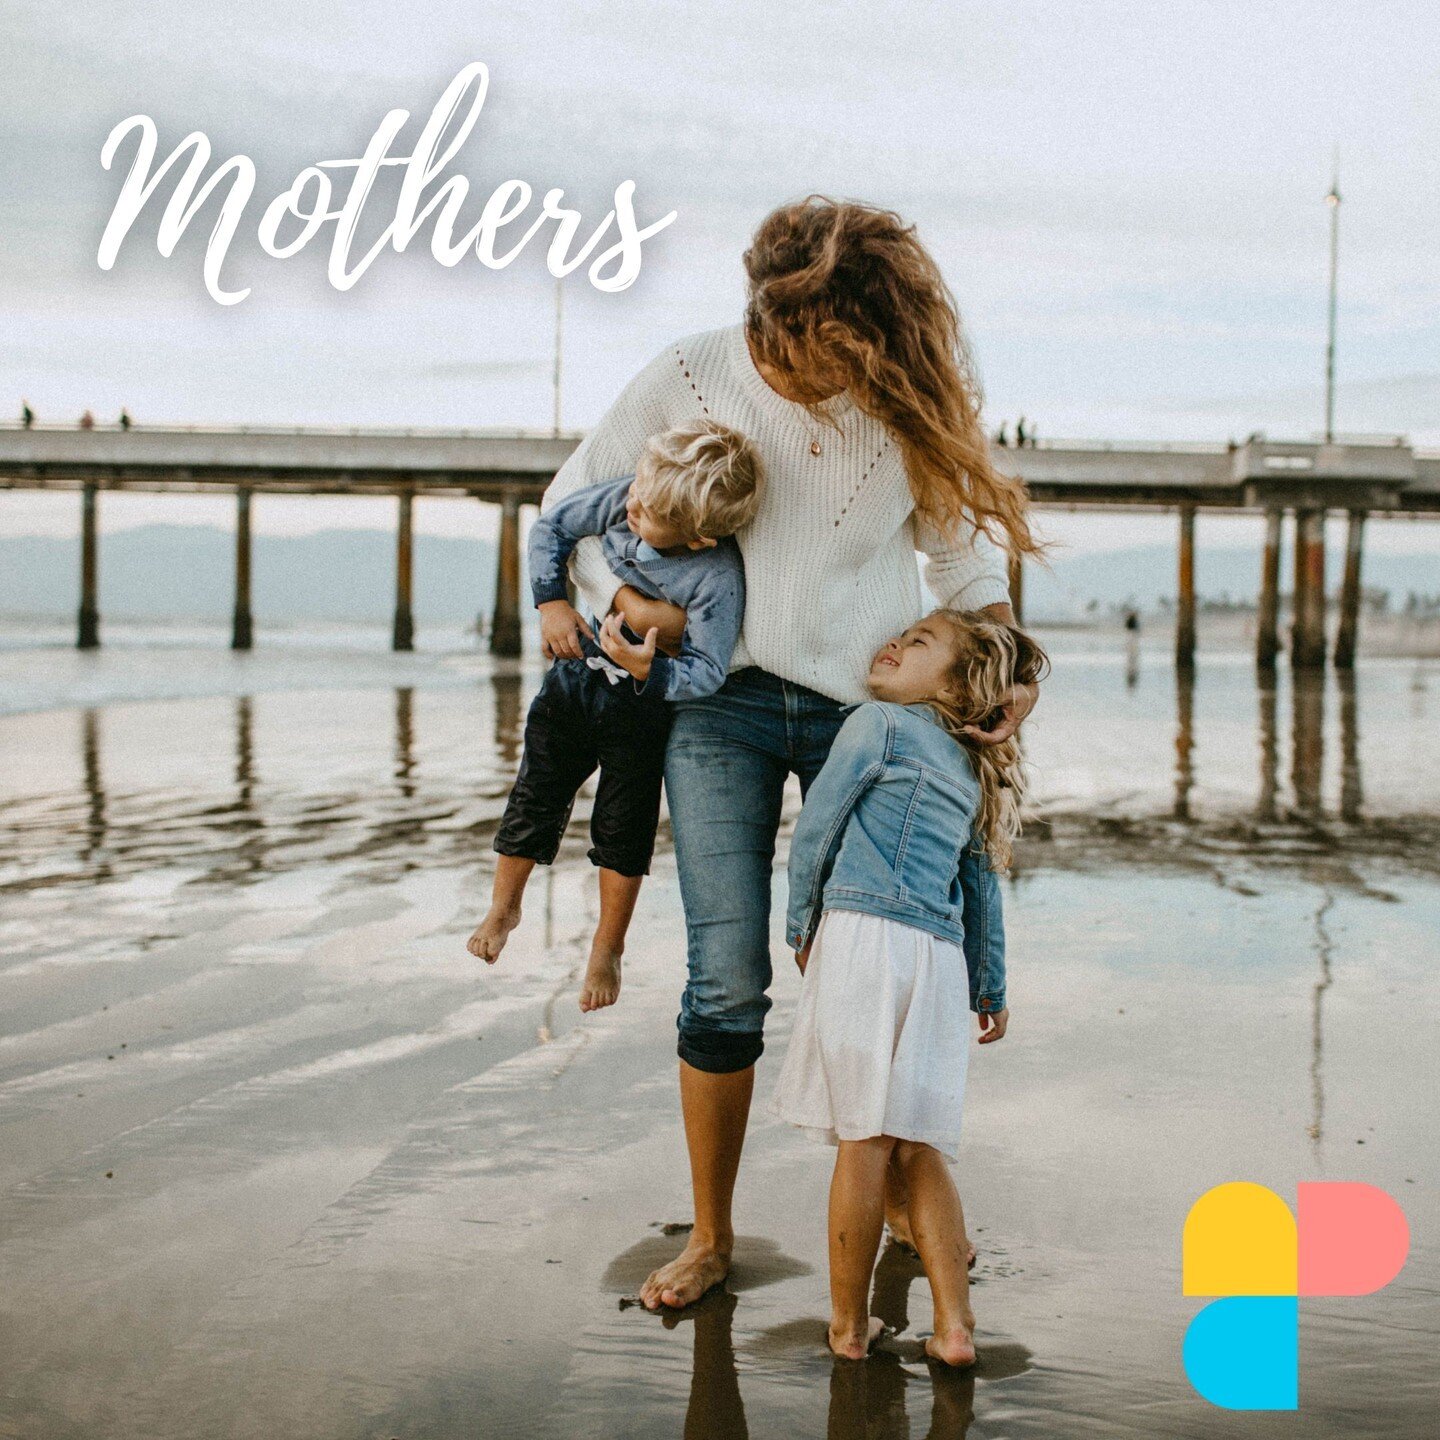 &ldquo;The influence of a mother in the lives of her children is beyond calculation.&rdquo; - James E. Faust

✨Happy Mother&rsquo;s Day!✨